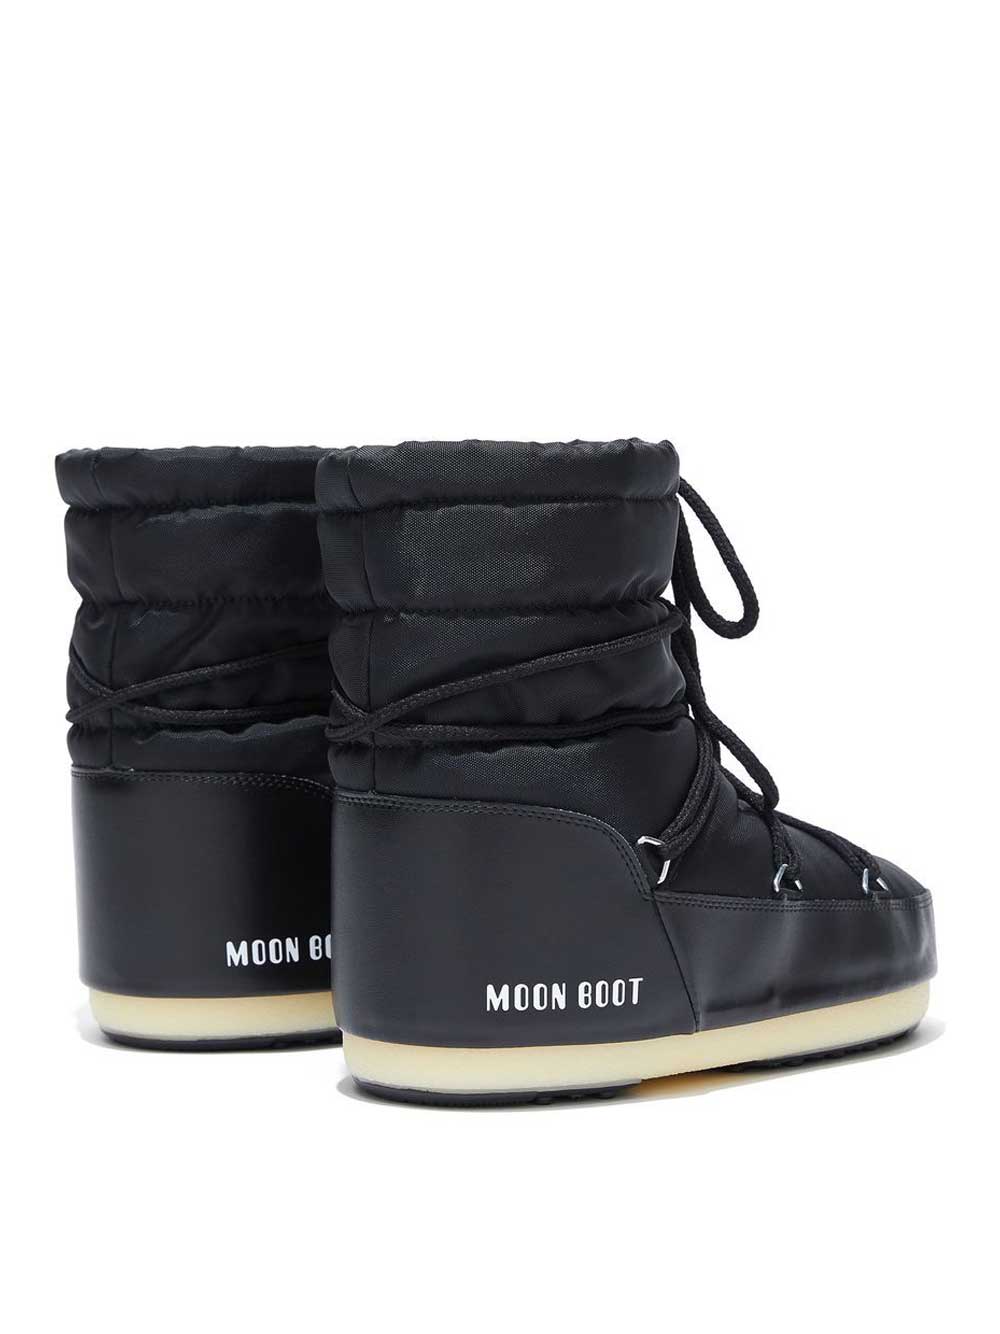 Black MB Low Boots